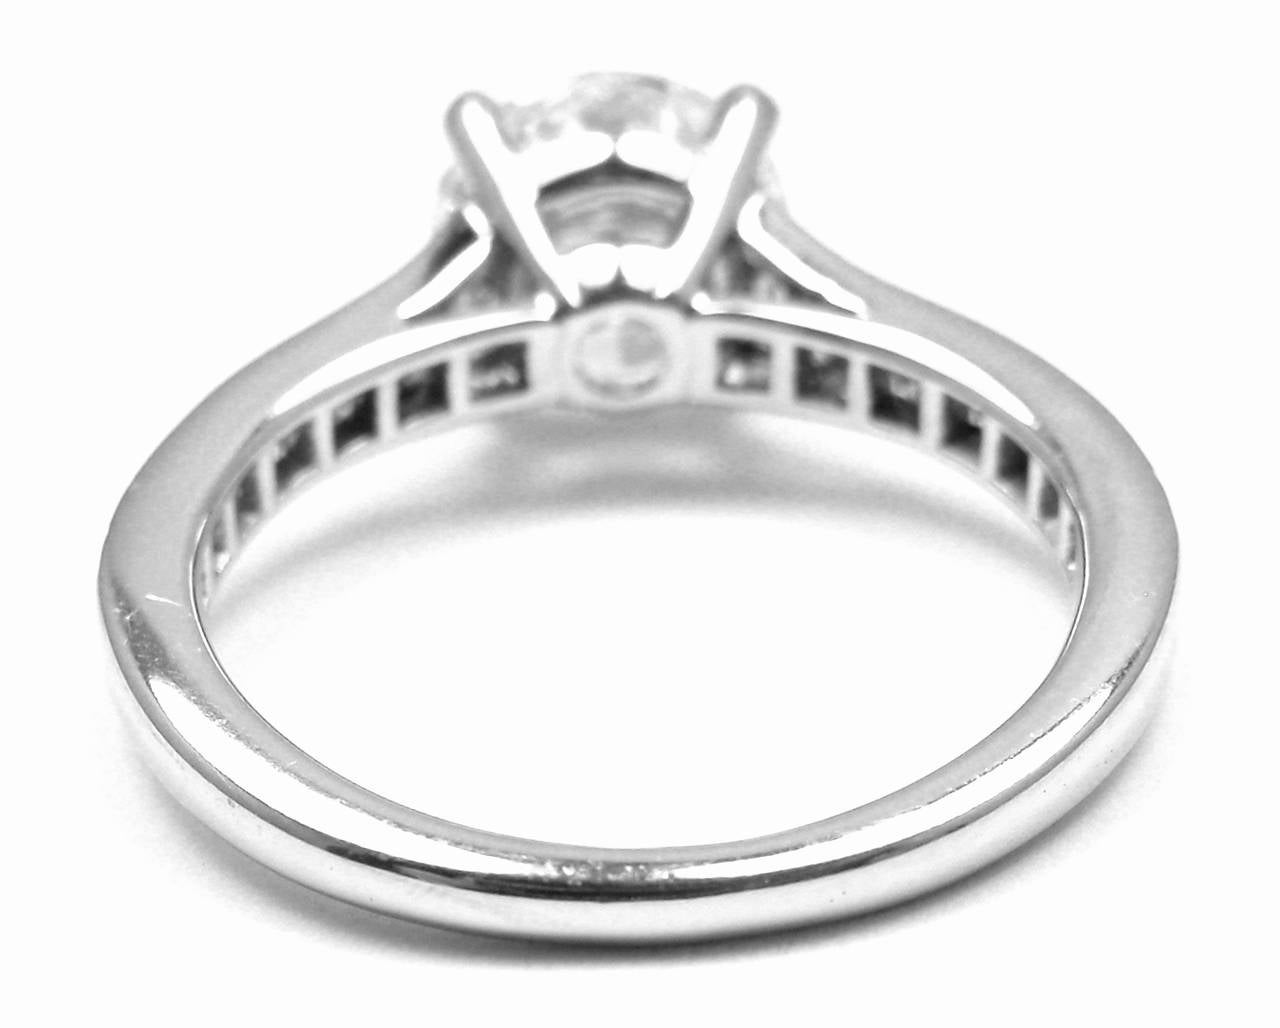 Platinum Diamond Solitaire Engagement Ring by Tiffany & Co. 
With 1.60ct Center Diamond VVS2 clarity, D color
.46ct square diamonds & .16ct baguette diamonds in the setting of the ring.
Includes Tiffany & Co Valuation, Tiffany& Co Diamond